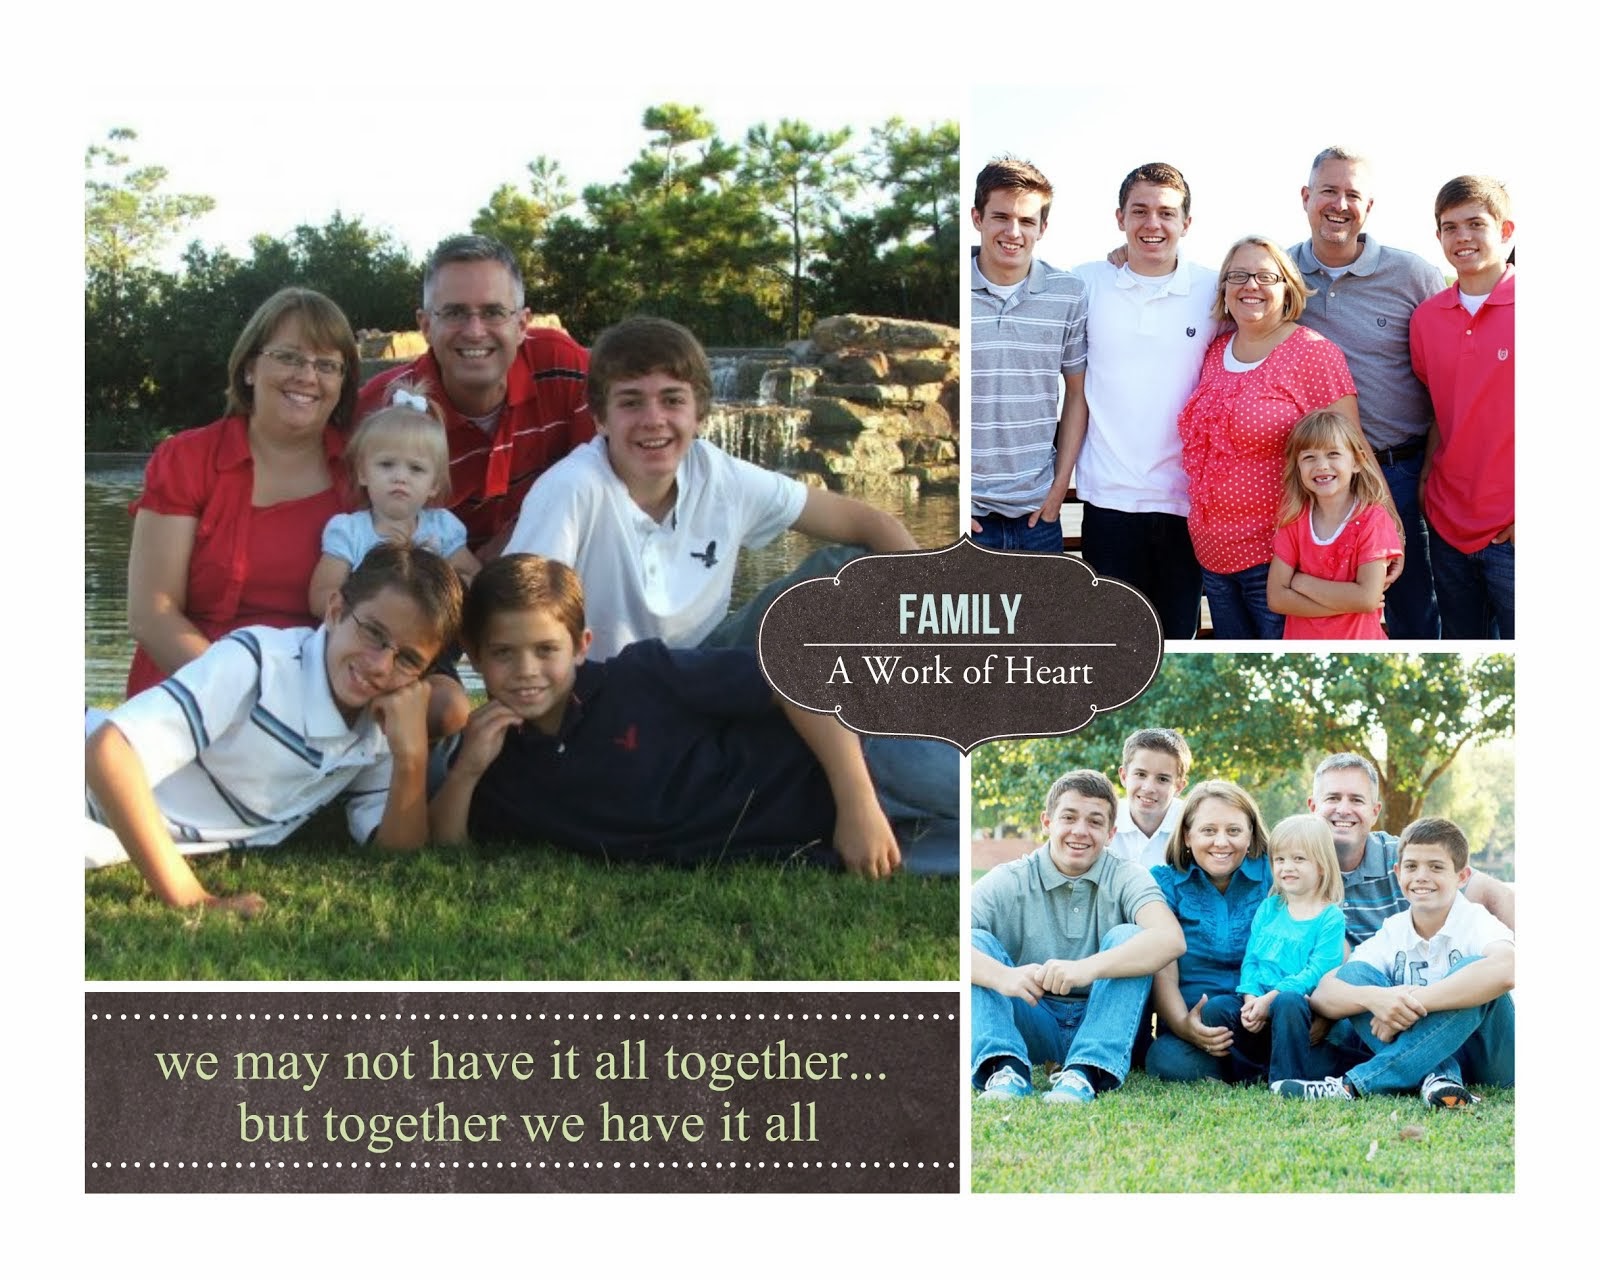 Our Family Is A Work of Heart